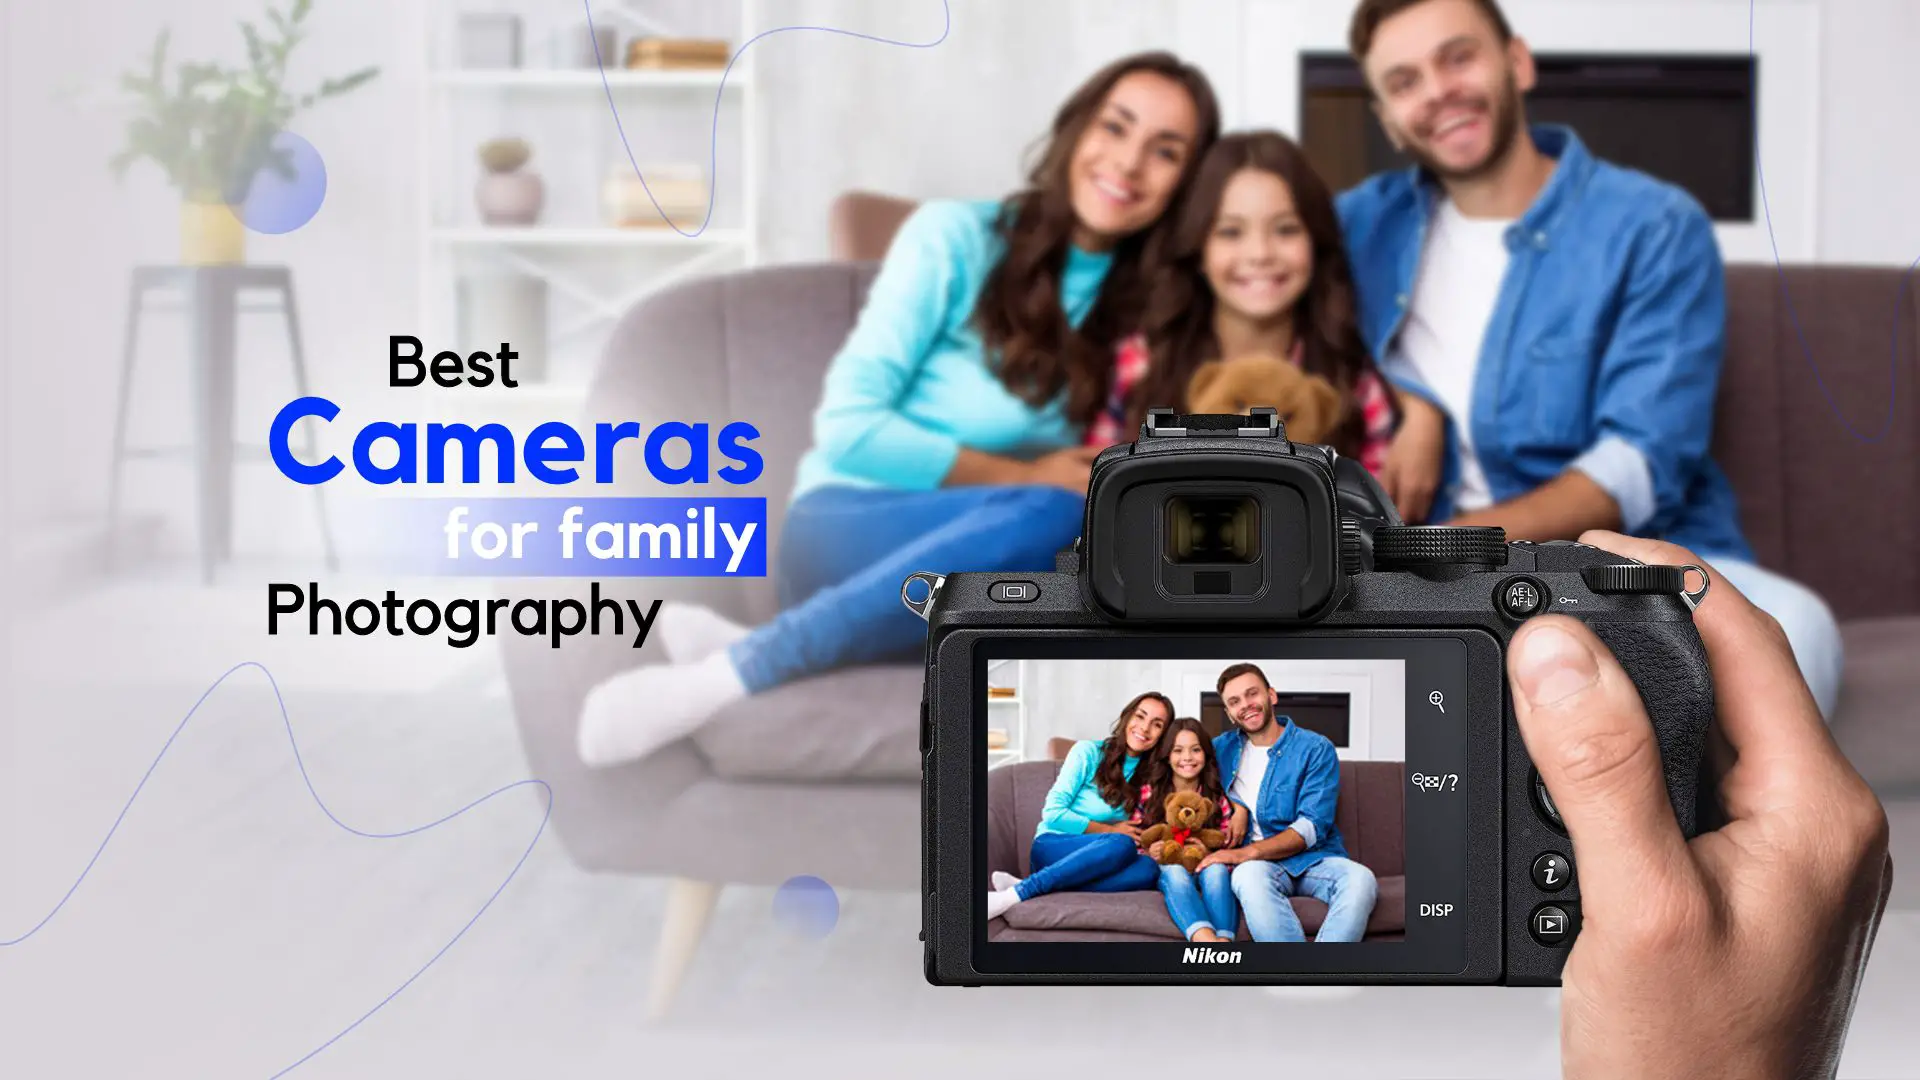 Best Cameras for family photography